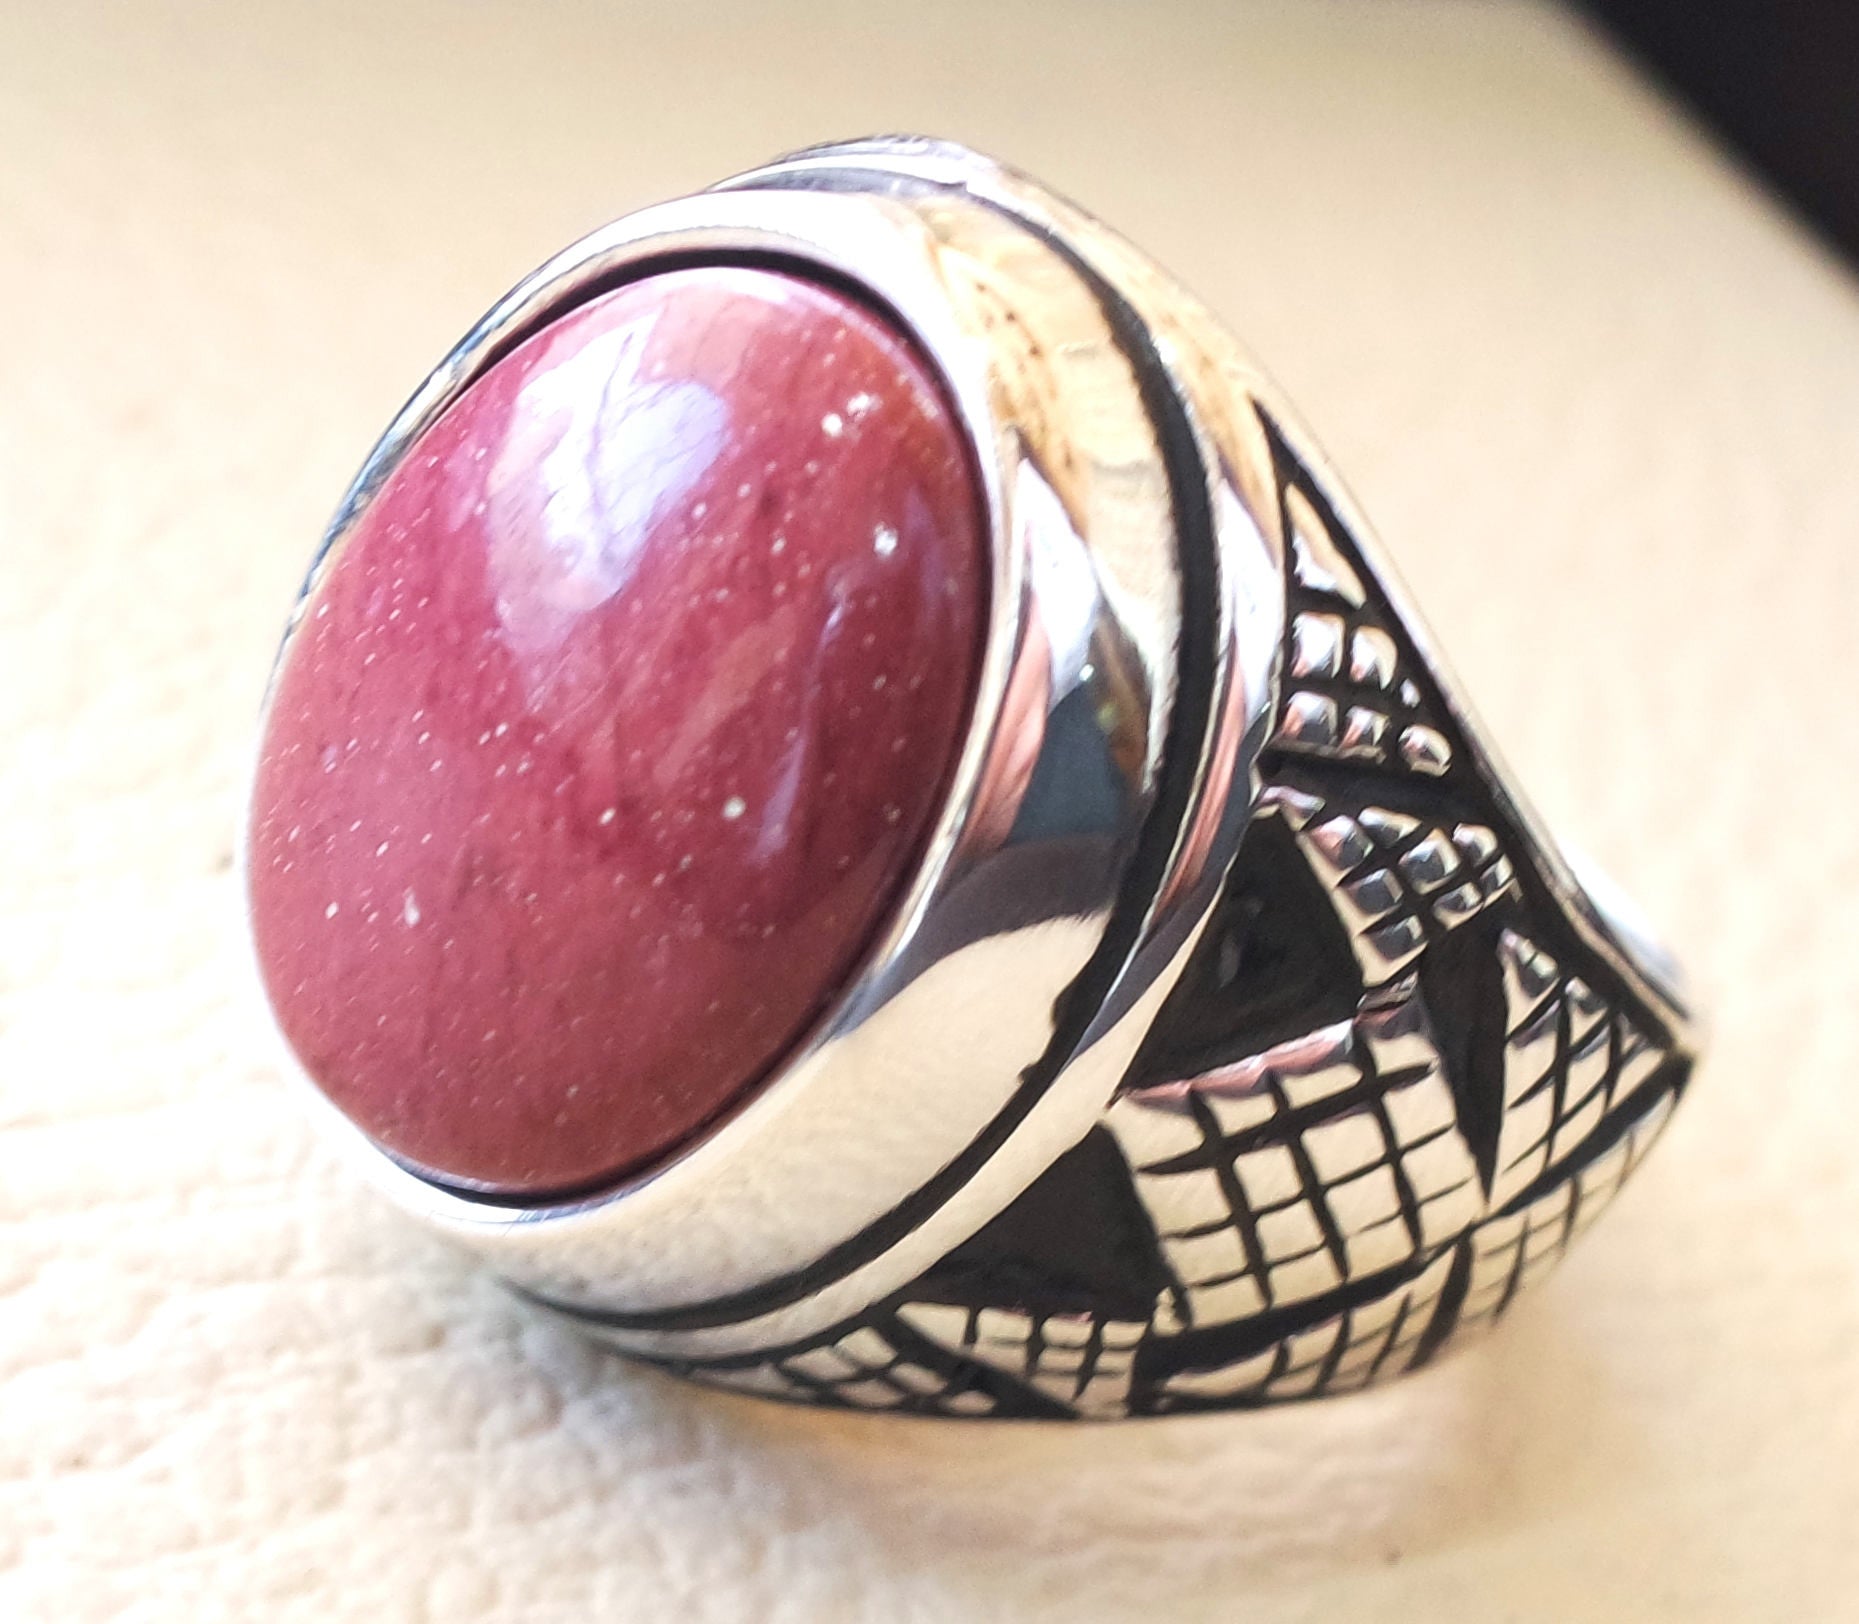 Red Rose Mookaite Jasper Aqeeq Natural Stone sterling silver 925 Heavy Men Ring Vintage arabe style ottoman toutes les tailles expédition rapide